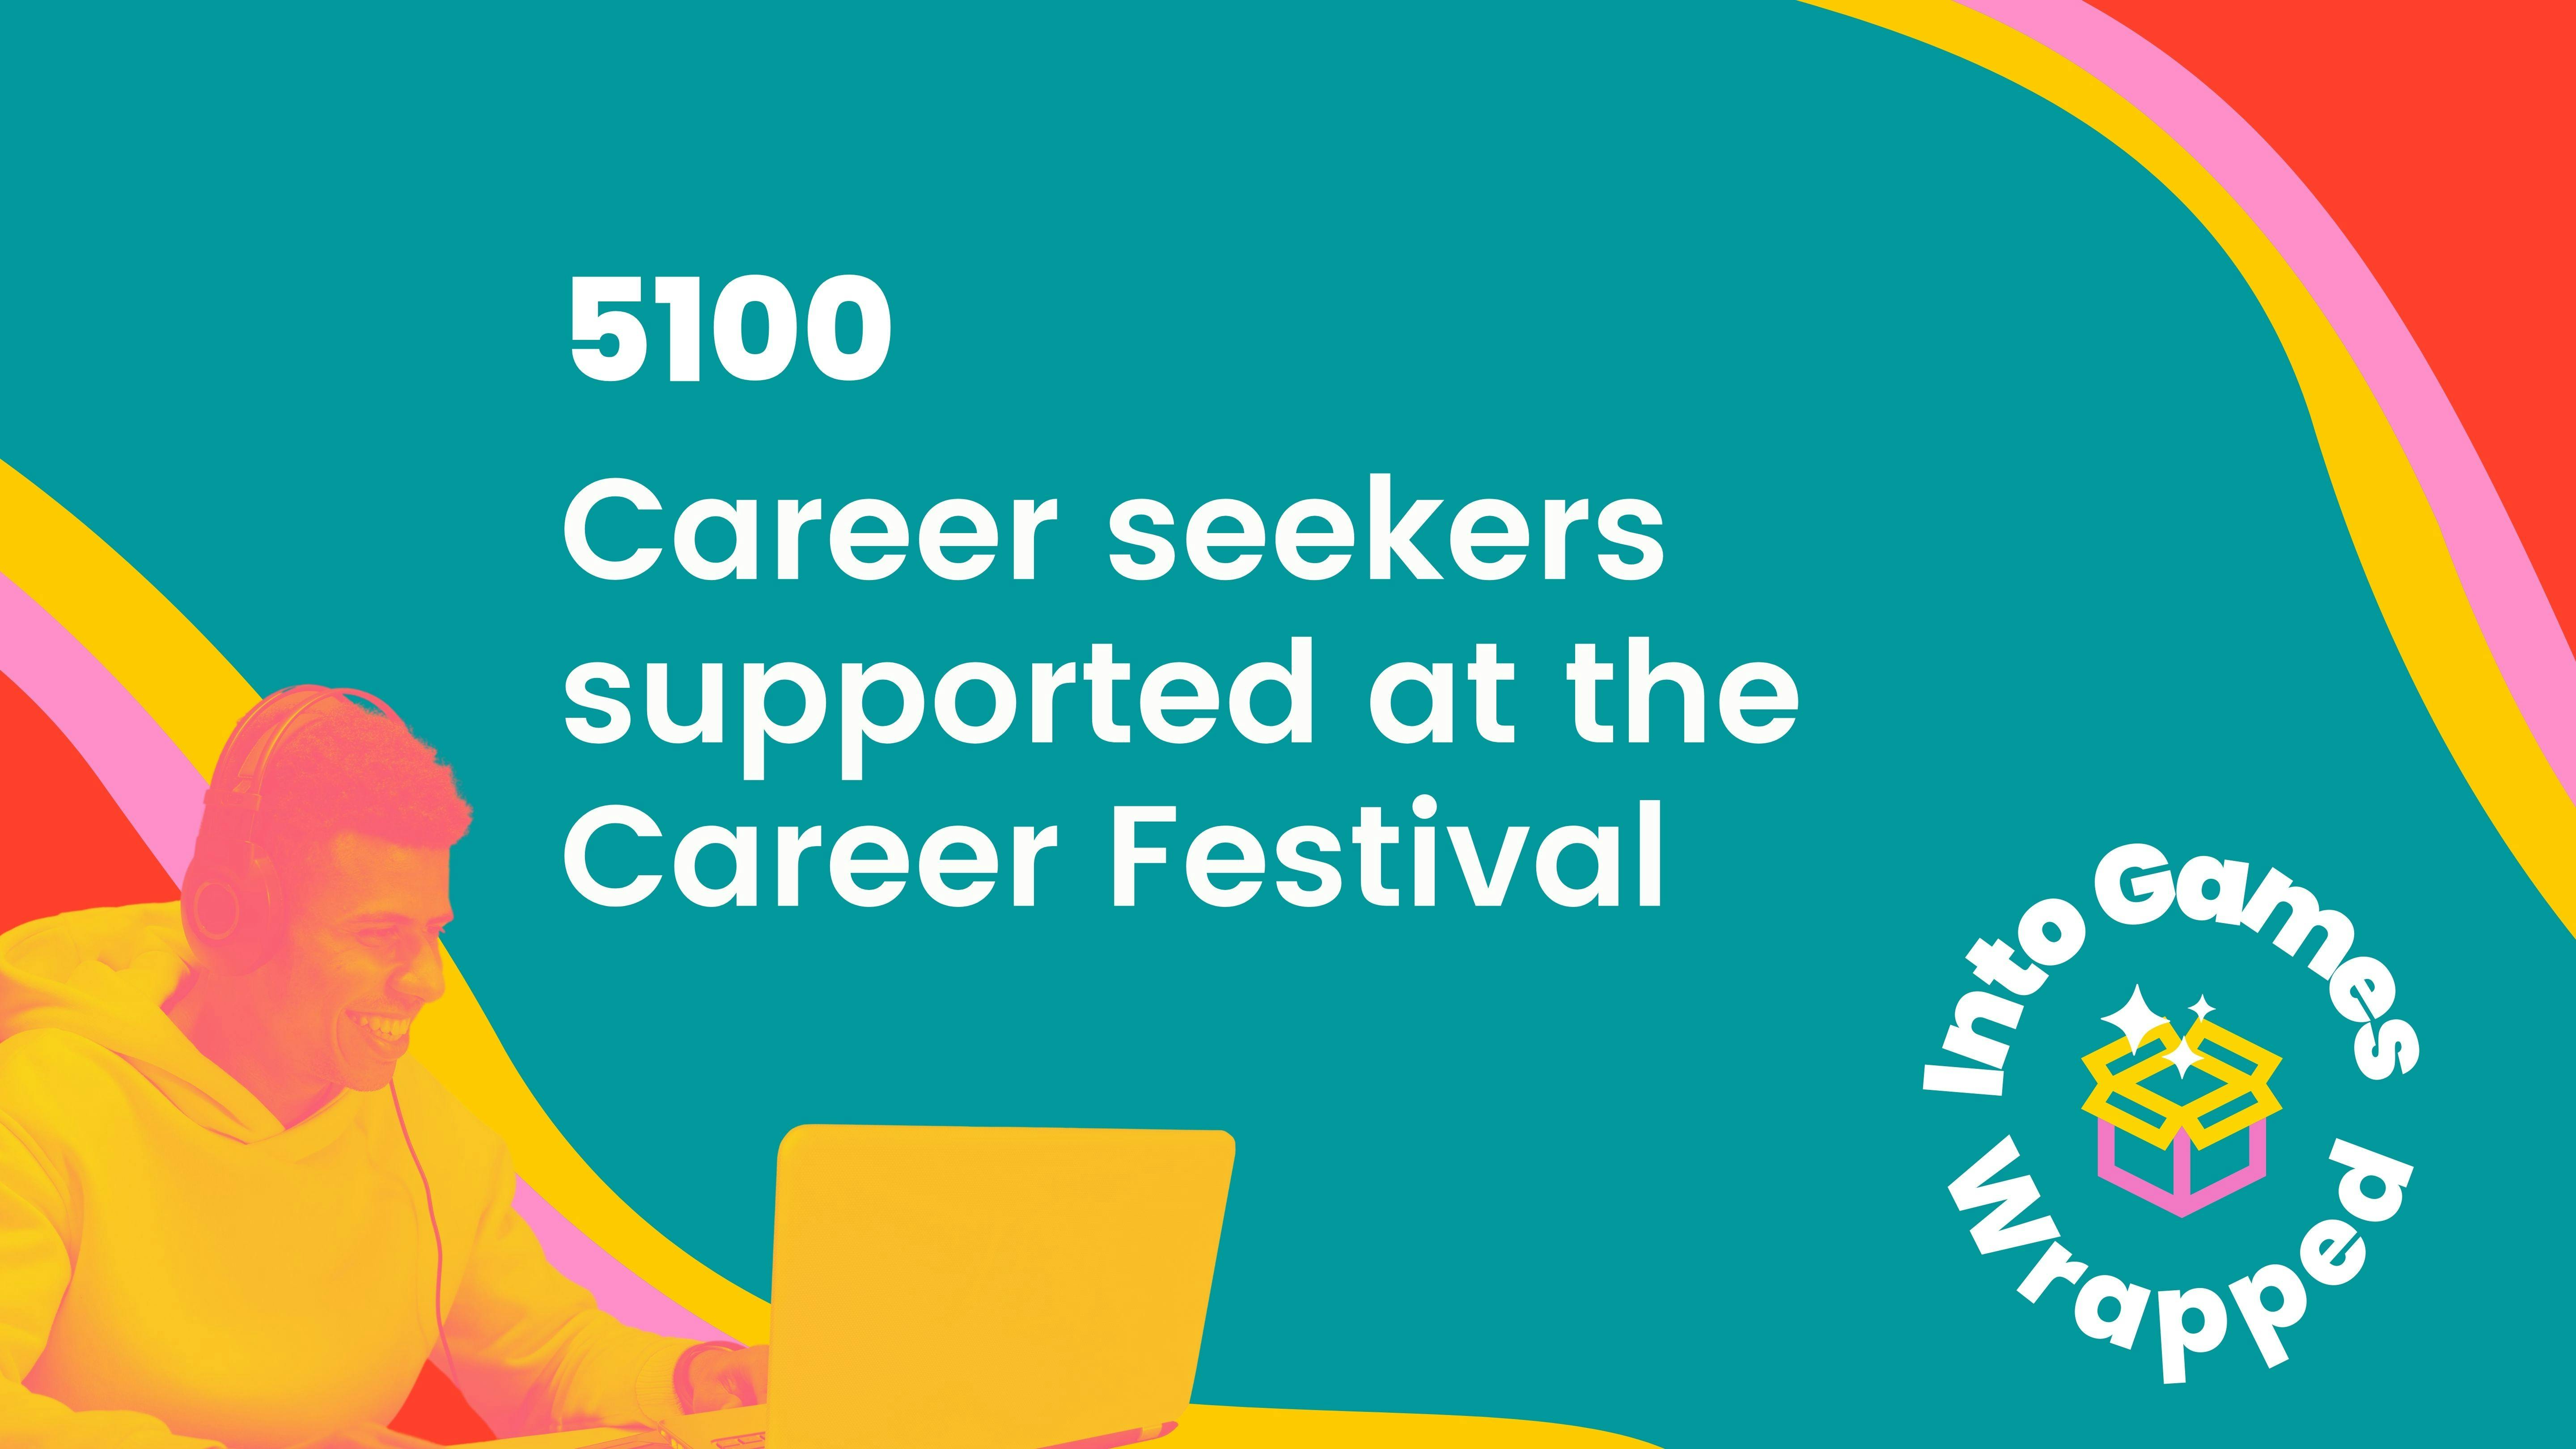 5100 career seekers supported at the career festival